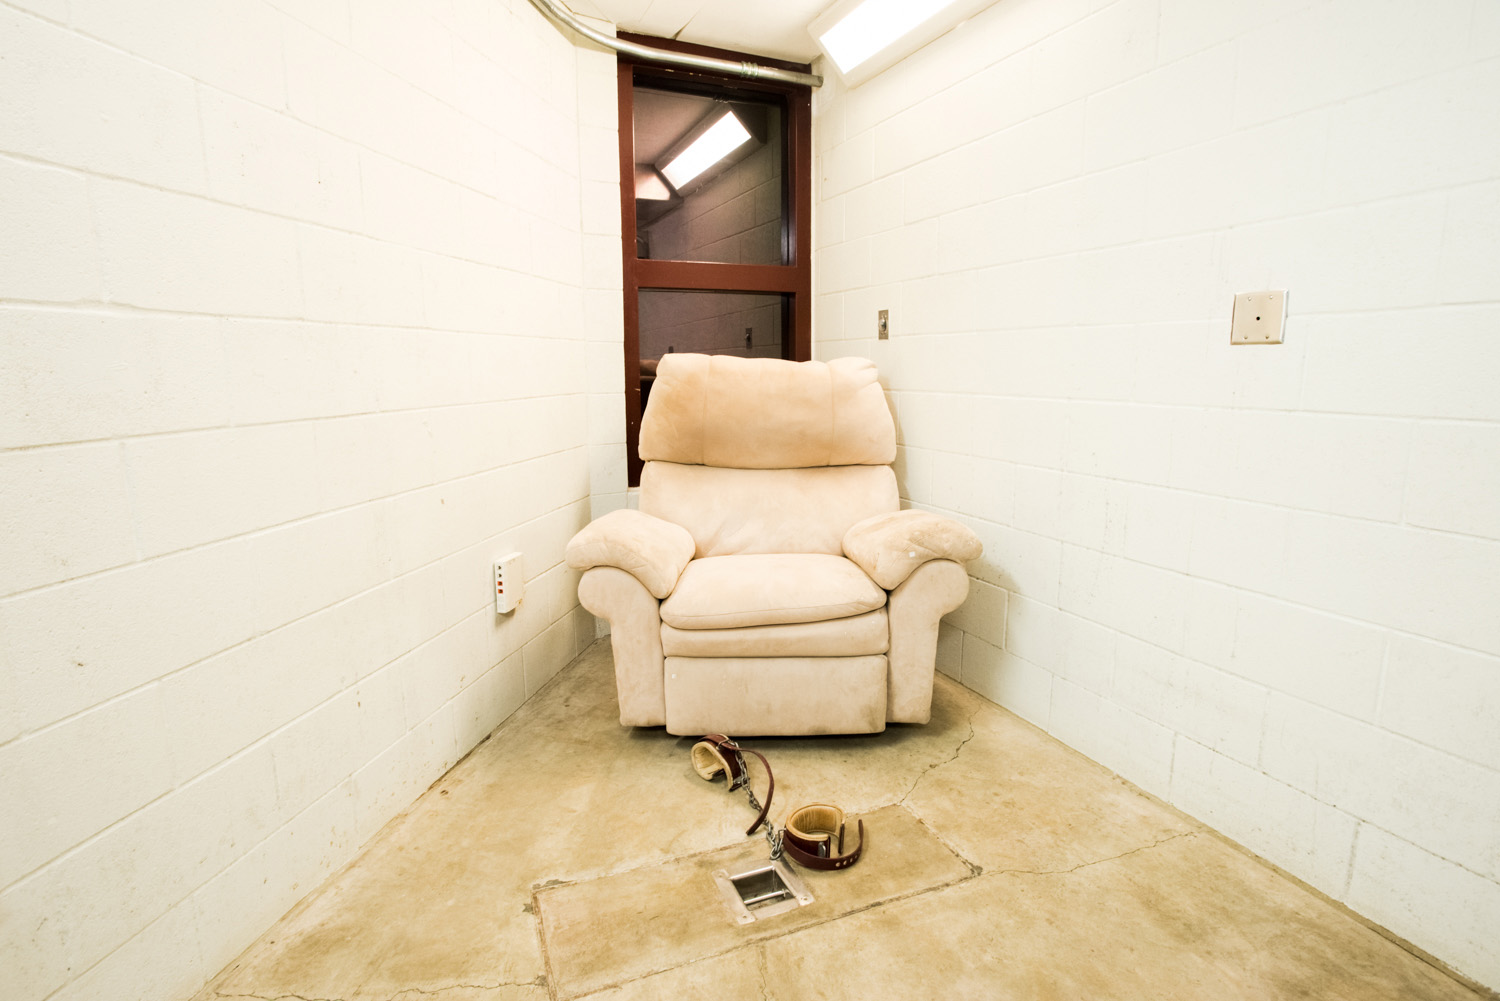 Compliant Detainee Media Room, Camp 5. From the ongoing series, "Gitmo at Home, Gitmo at Play."